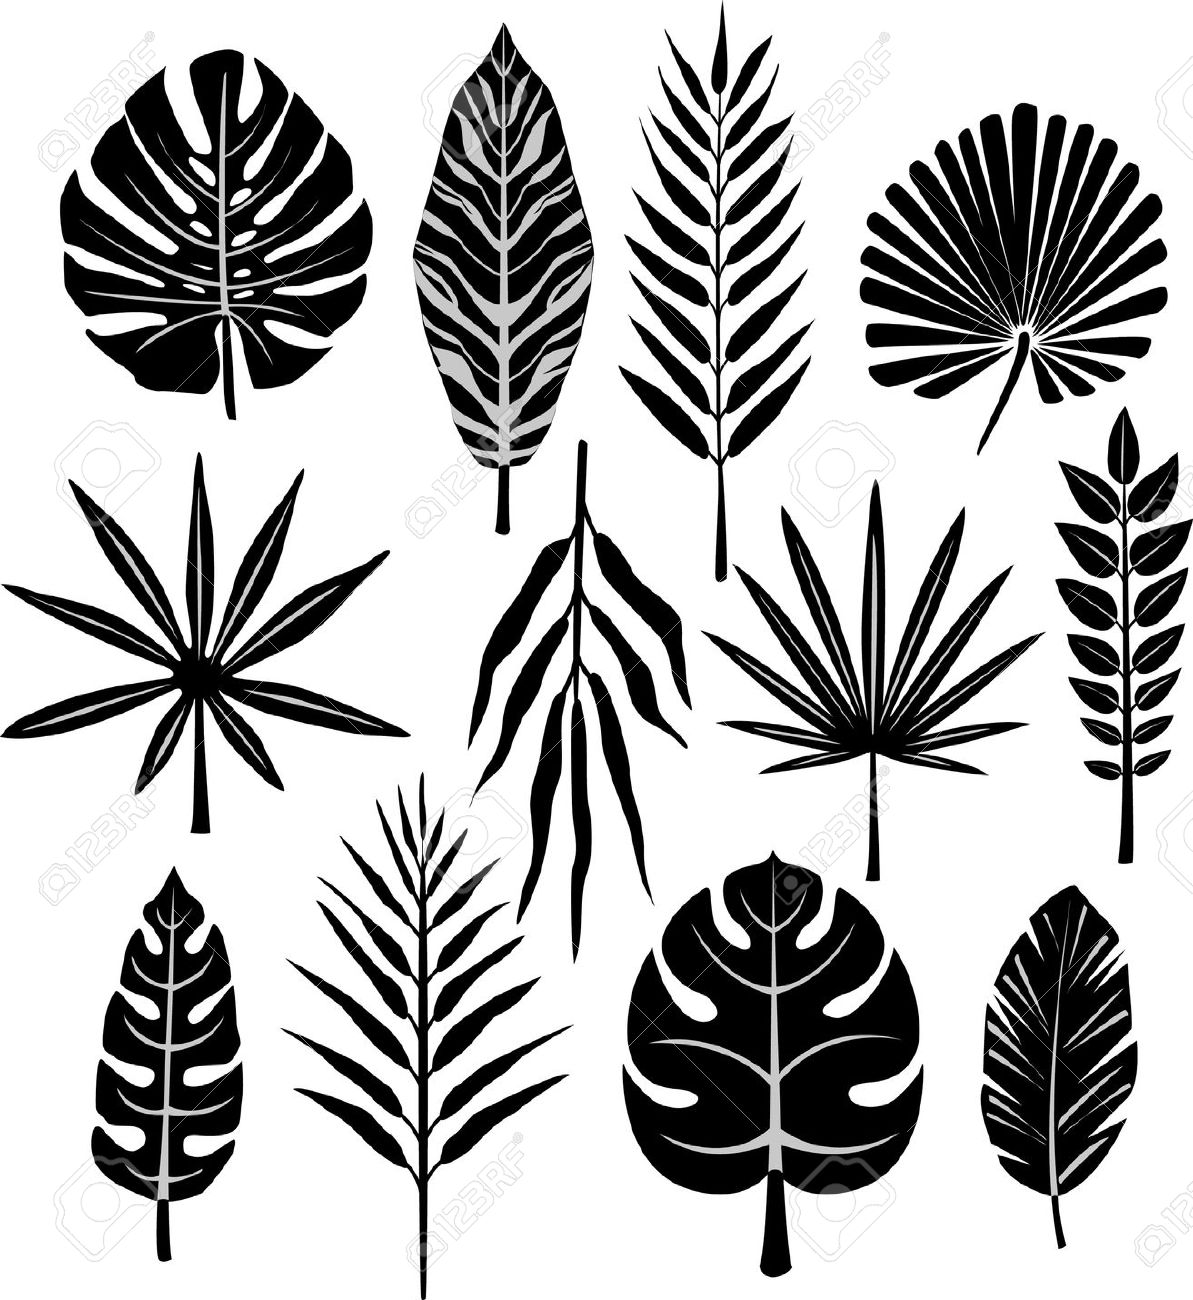 Foliage svg #8, Download drawings